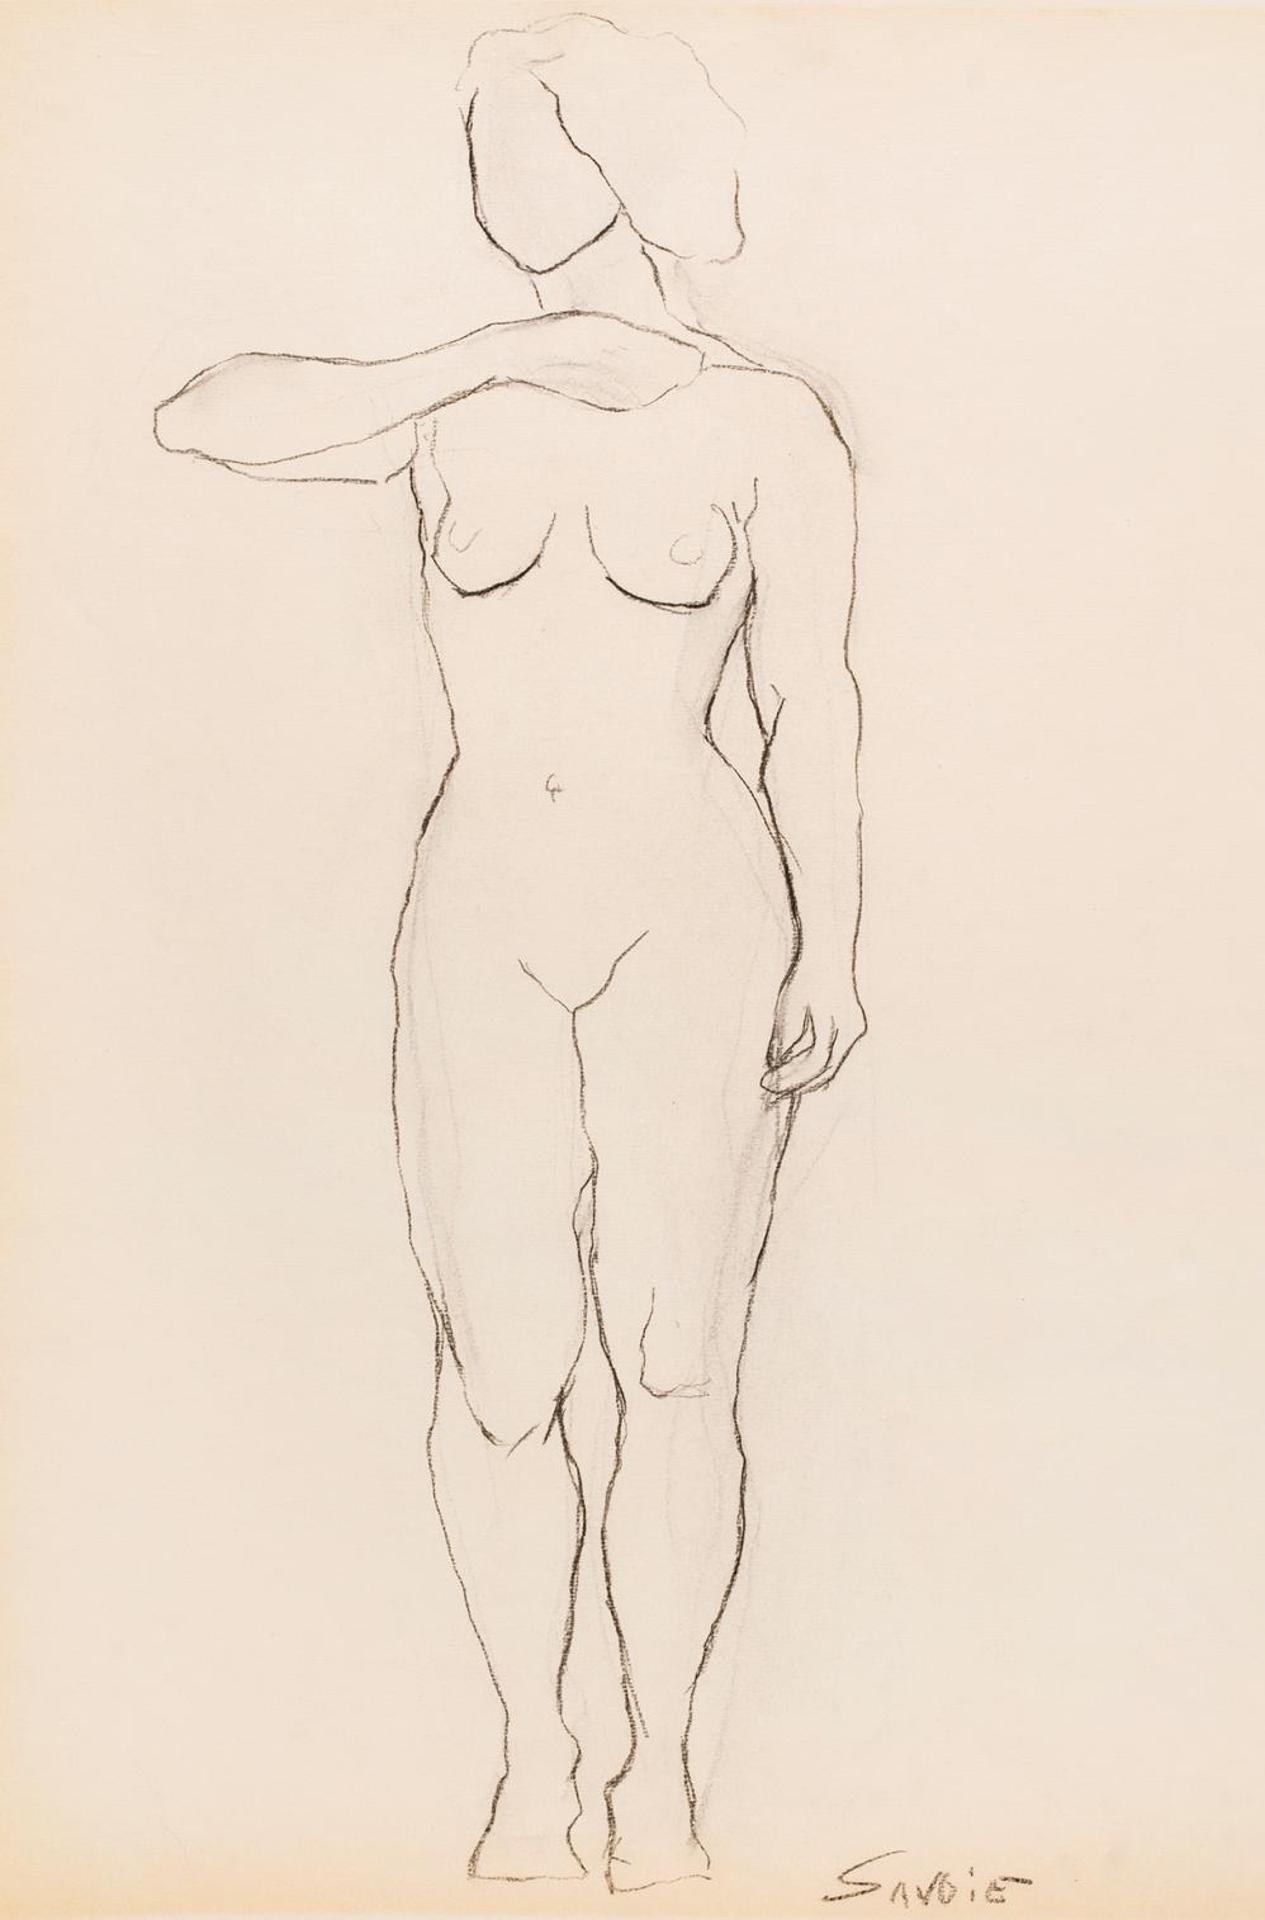 Gerald Savoie (1930) - Untitled - Study of a Female Model with Arm Raised